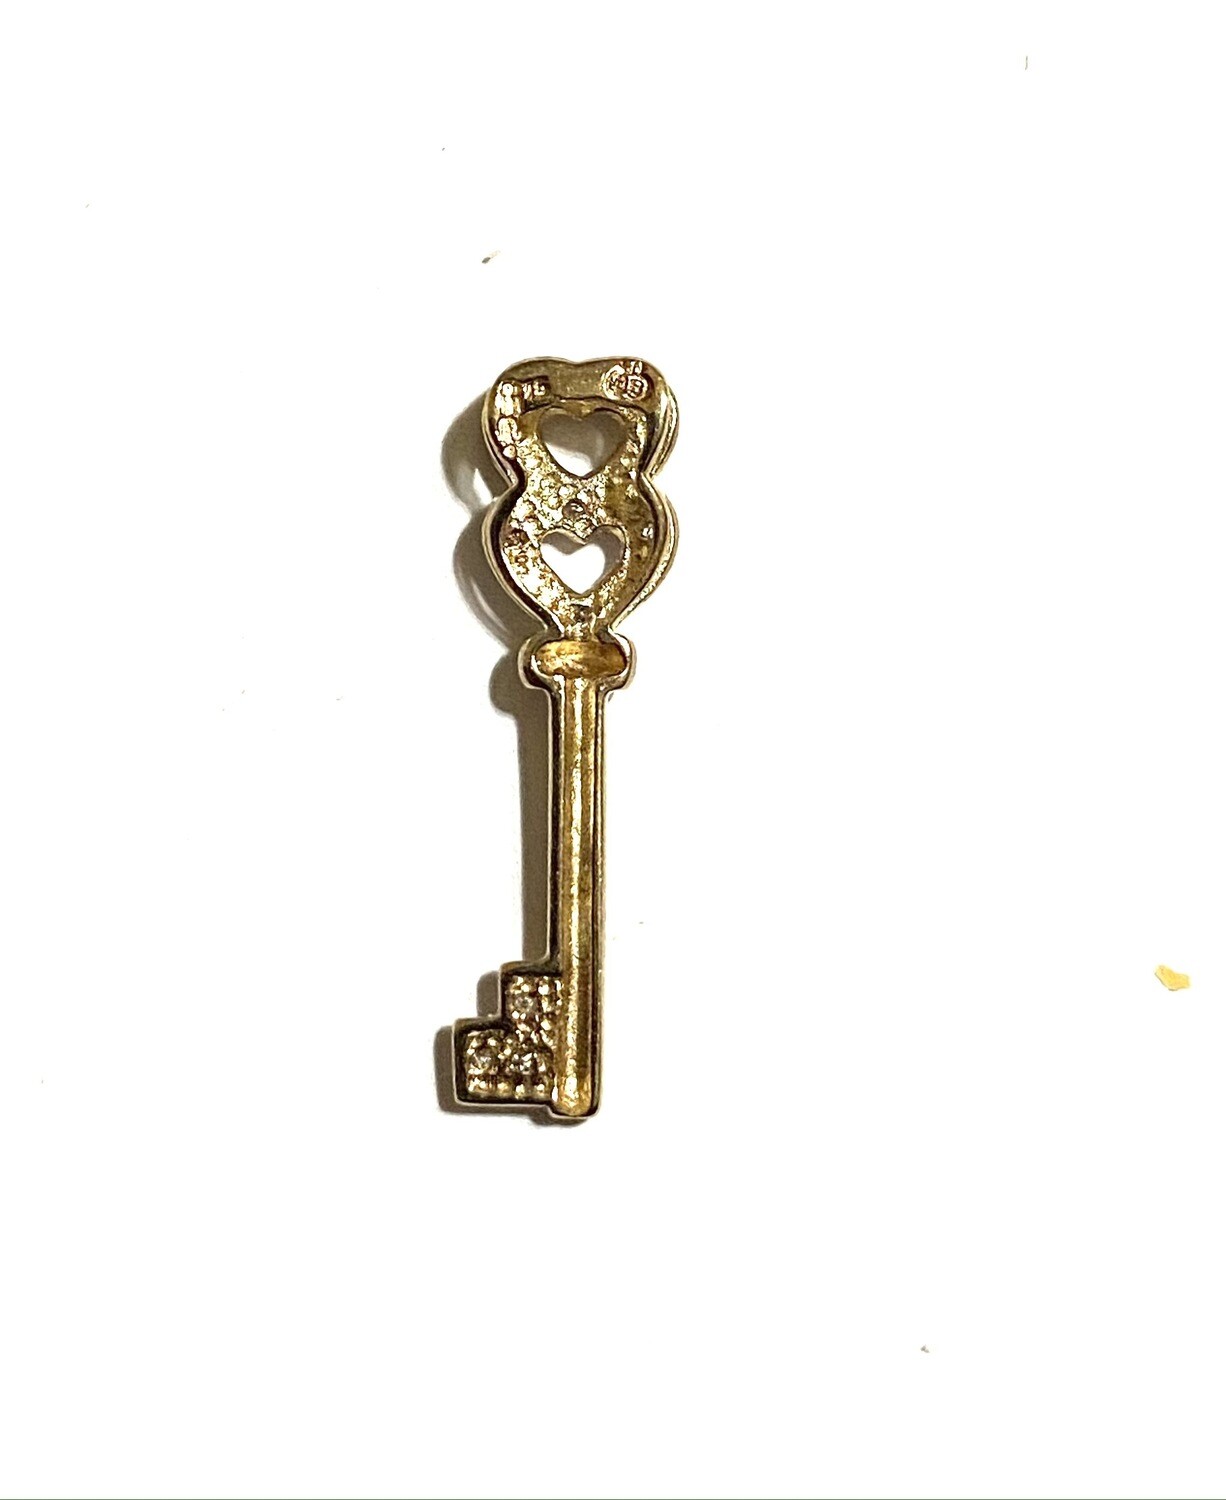 9ct vintage key charm with tow diamond hearts entwined as one